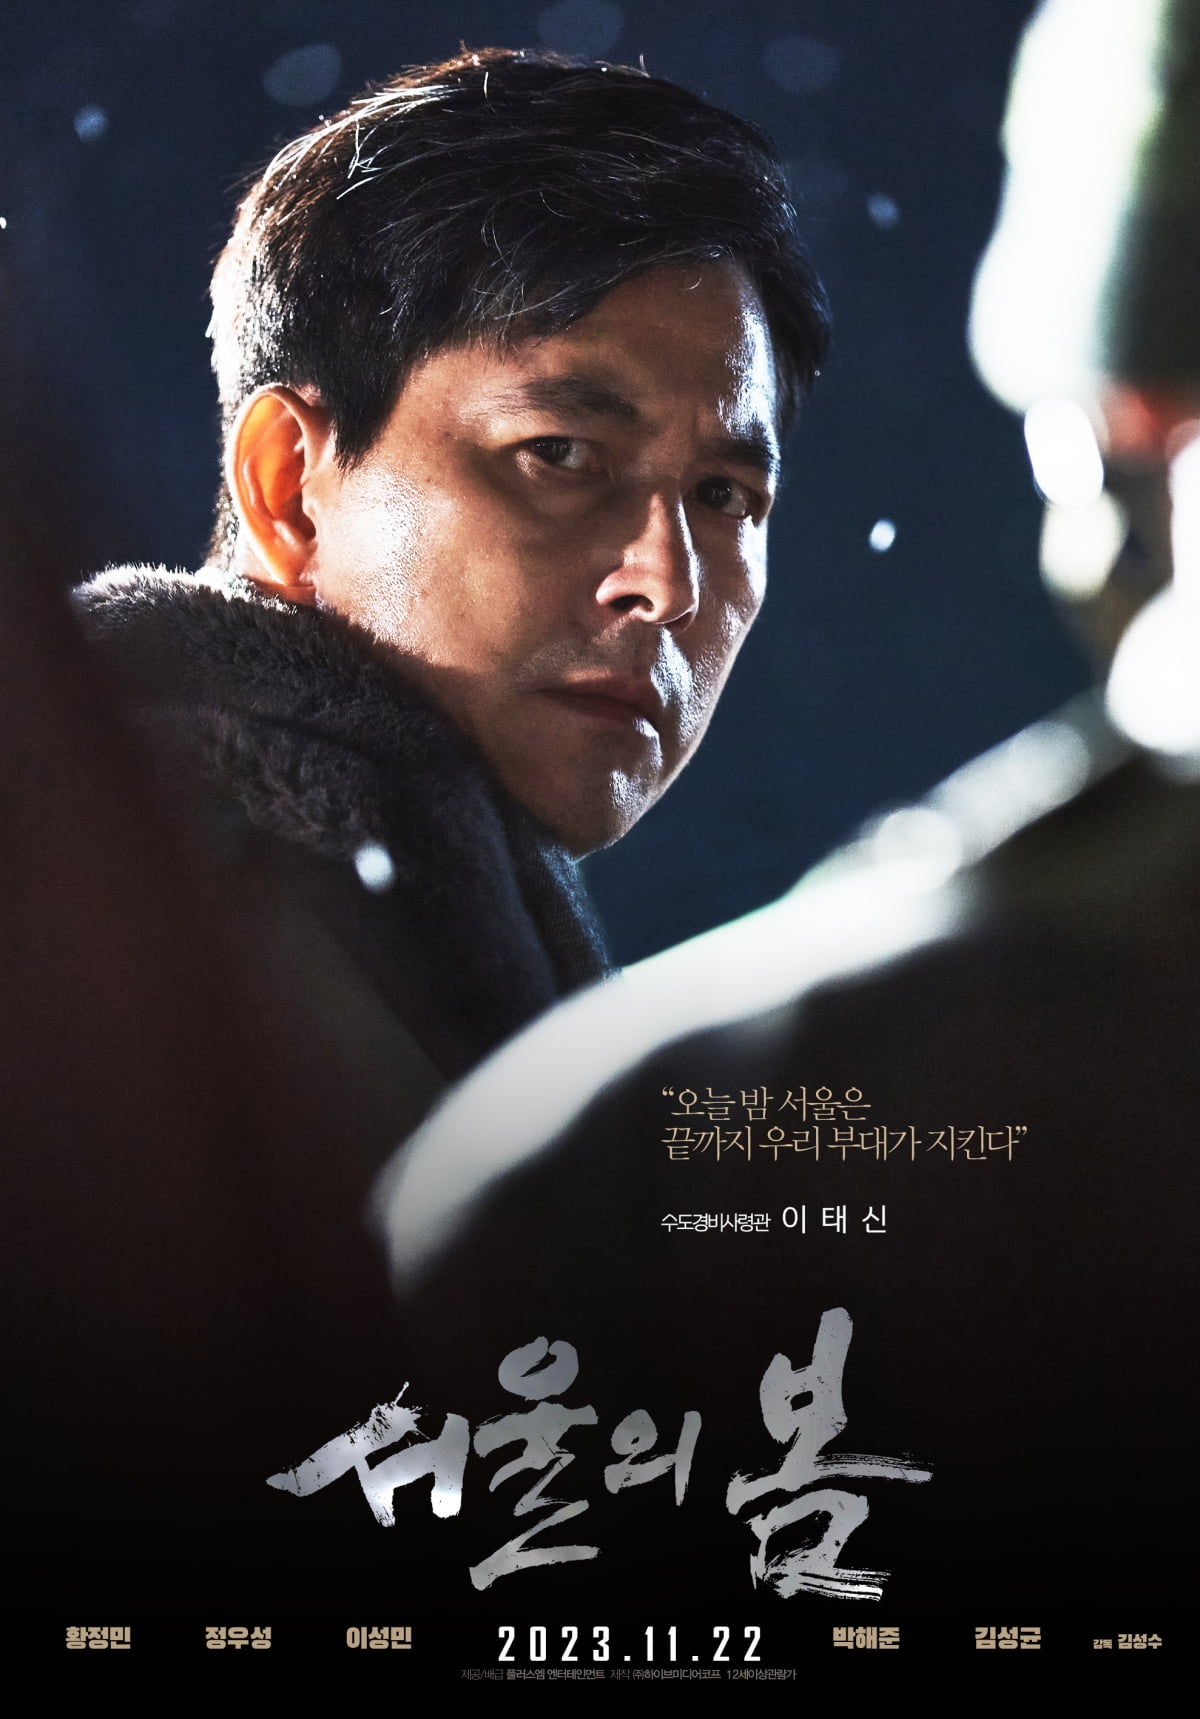 Jung Woo-sung, who said “Lee Jung-jae, my friend is a world star”, shows signs of hitting a career high with ‘12.12: THE DAY’